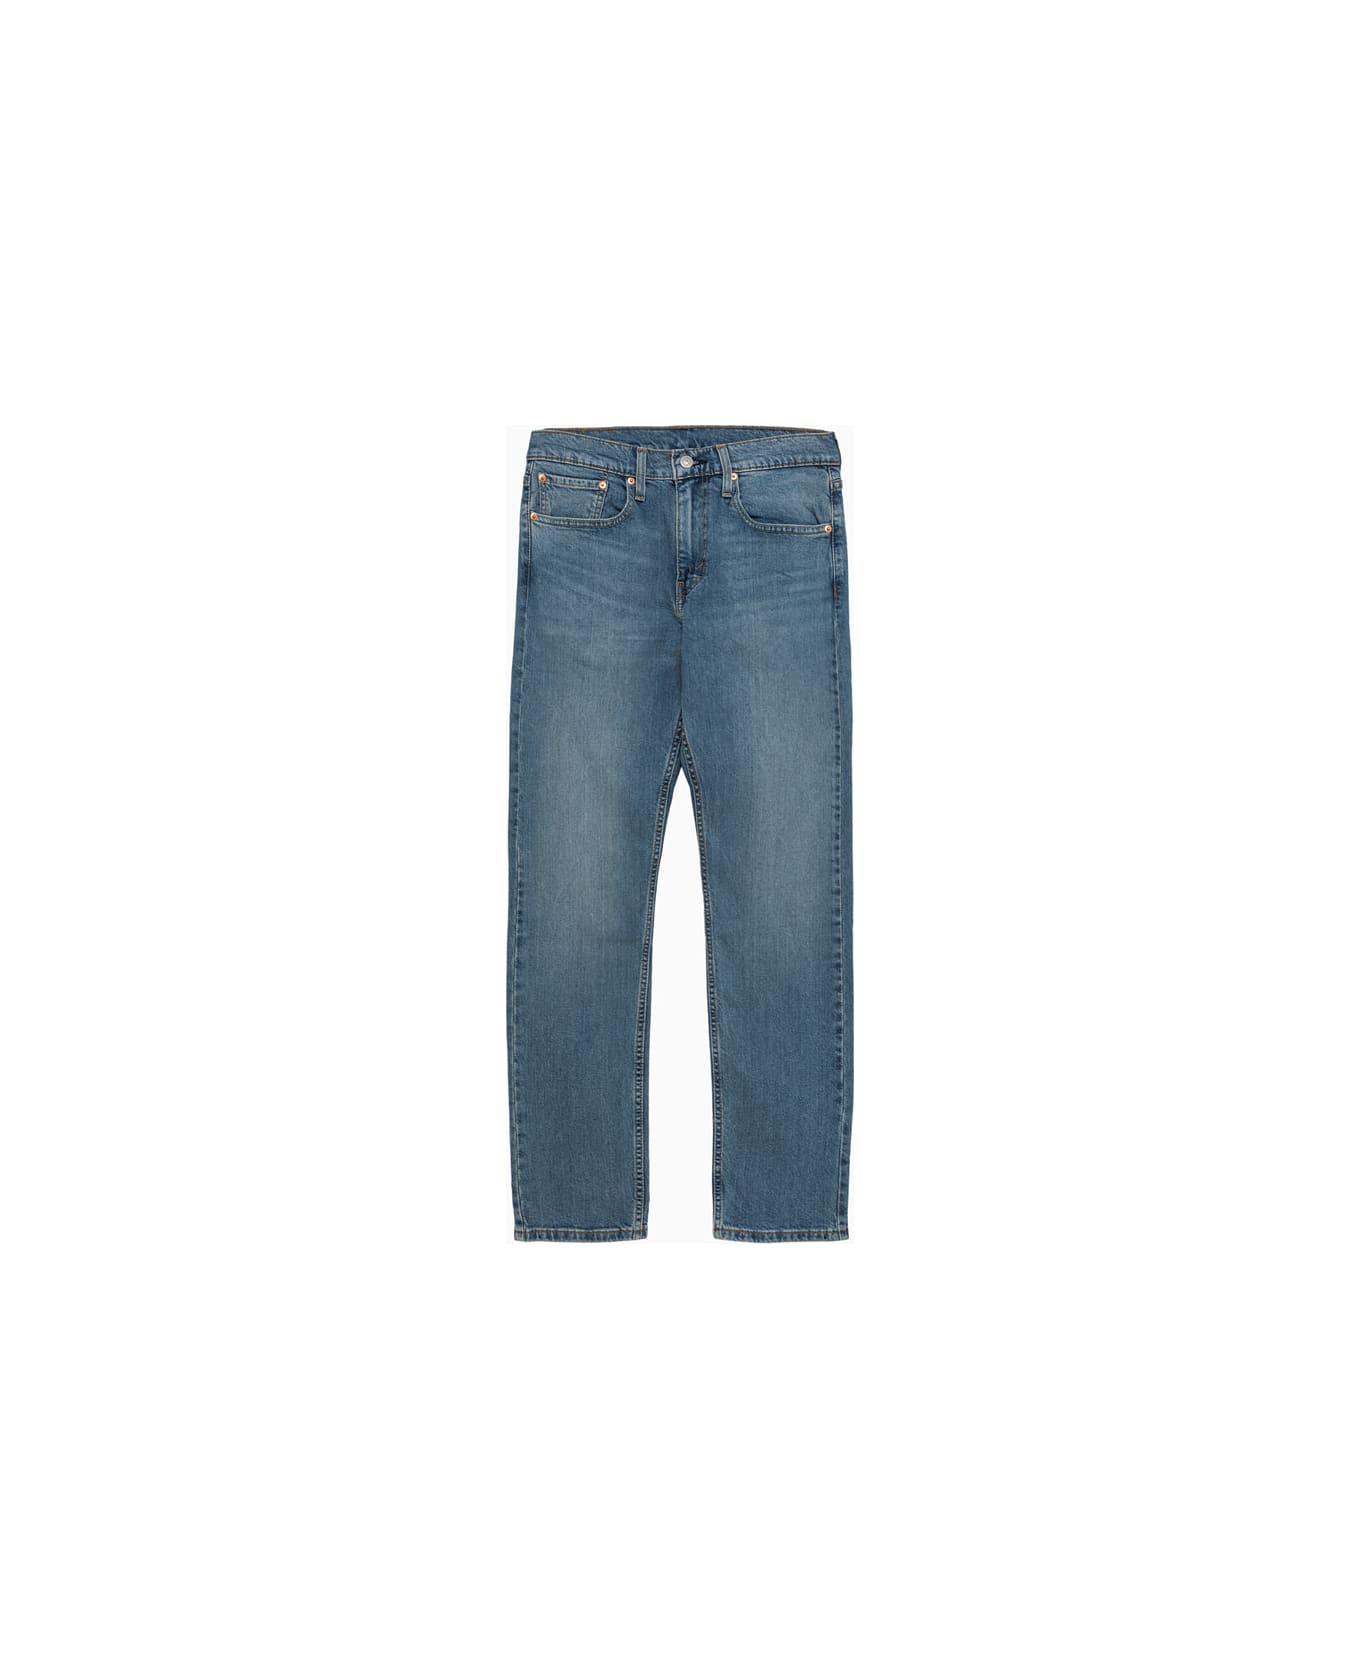 Levi's Levis 502 Into The Thick Of It Adv Jeans - Blue デニム